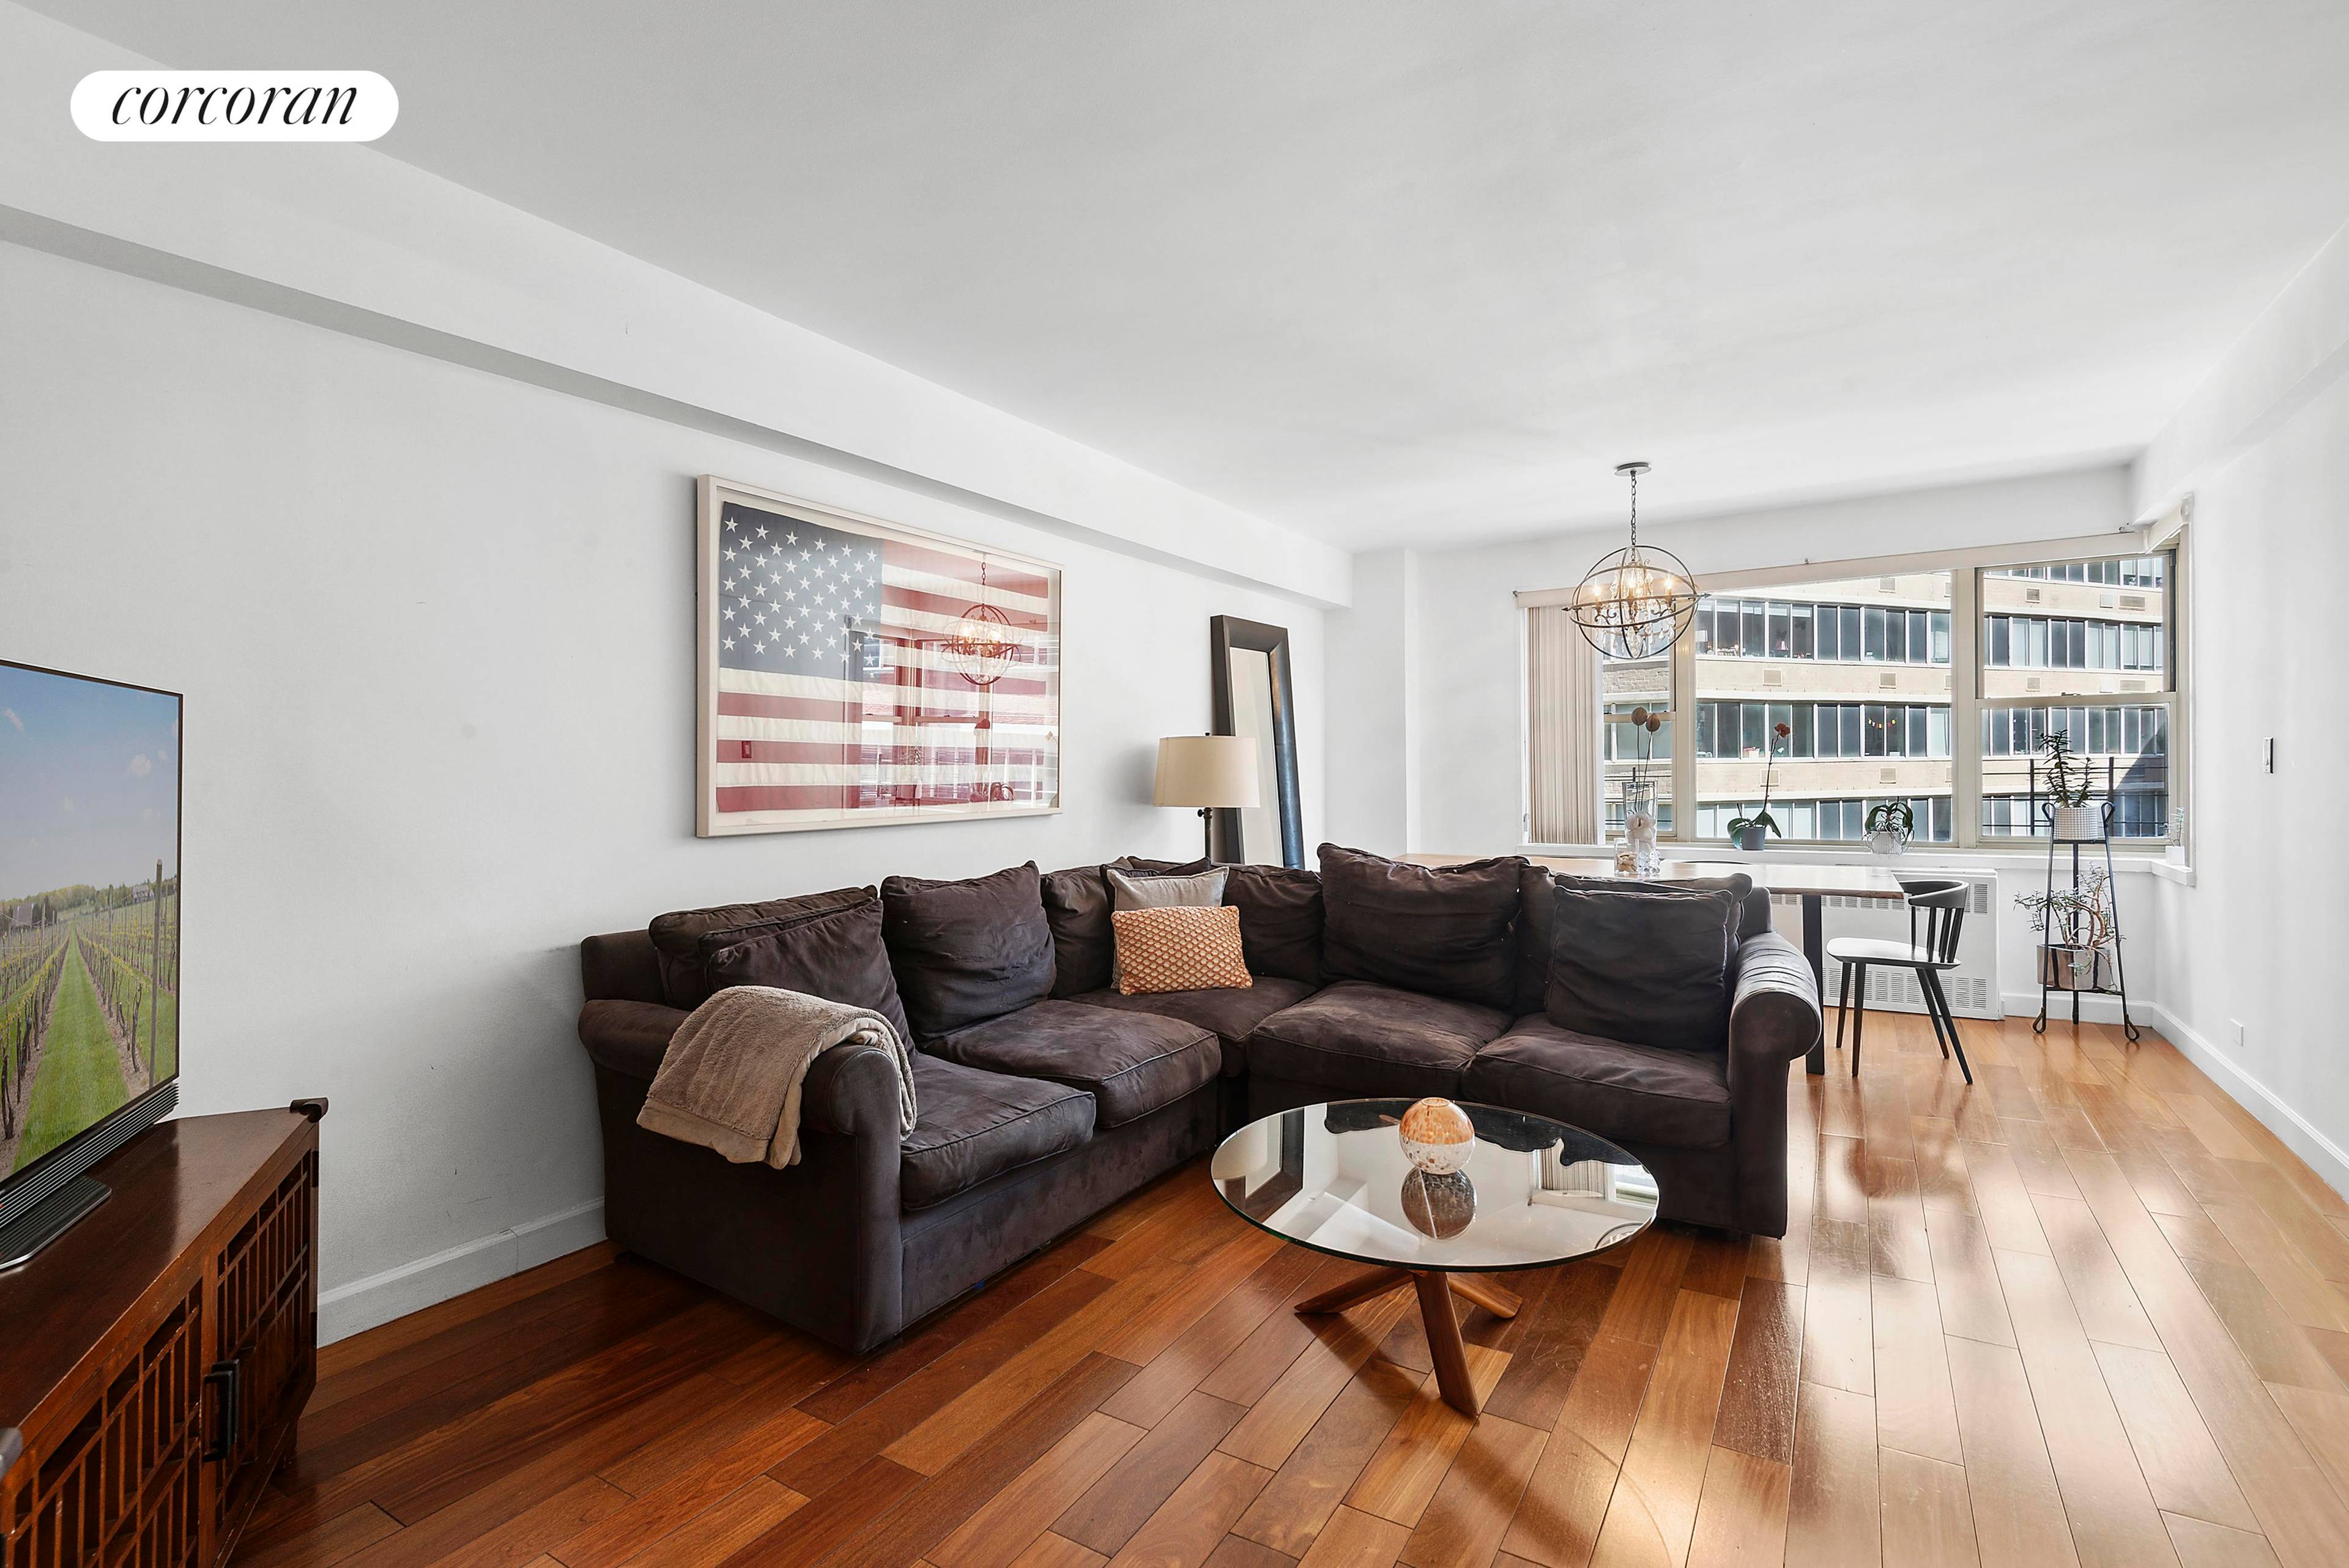 Welcome home to your beautifully renovated, converted two bedroom apartment in excellent condition, with partial East River views.